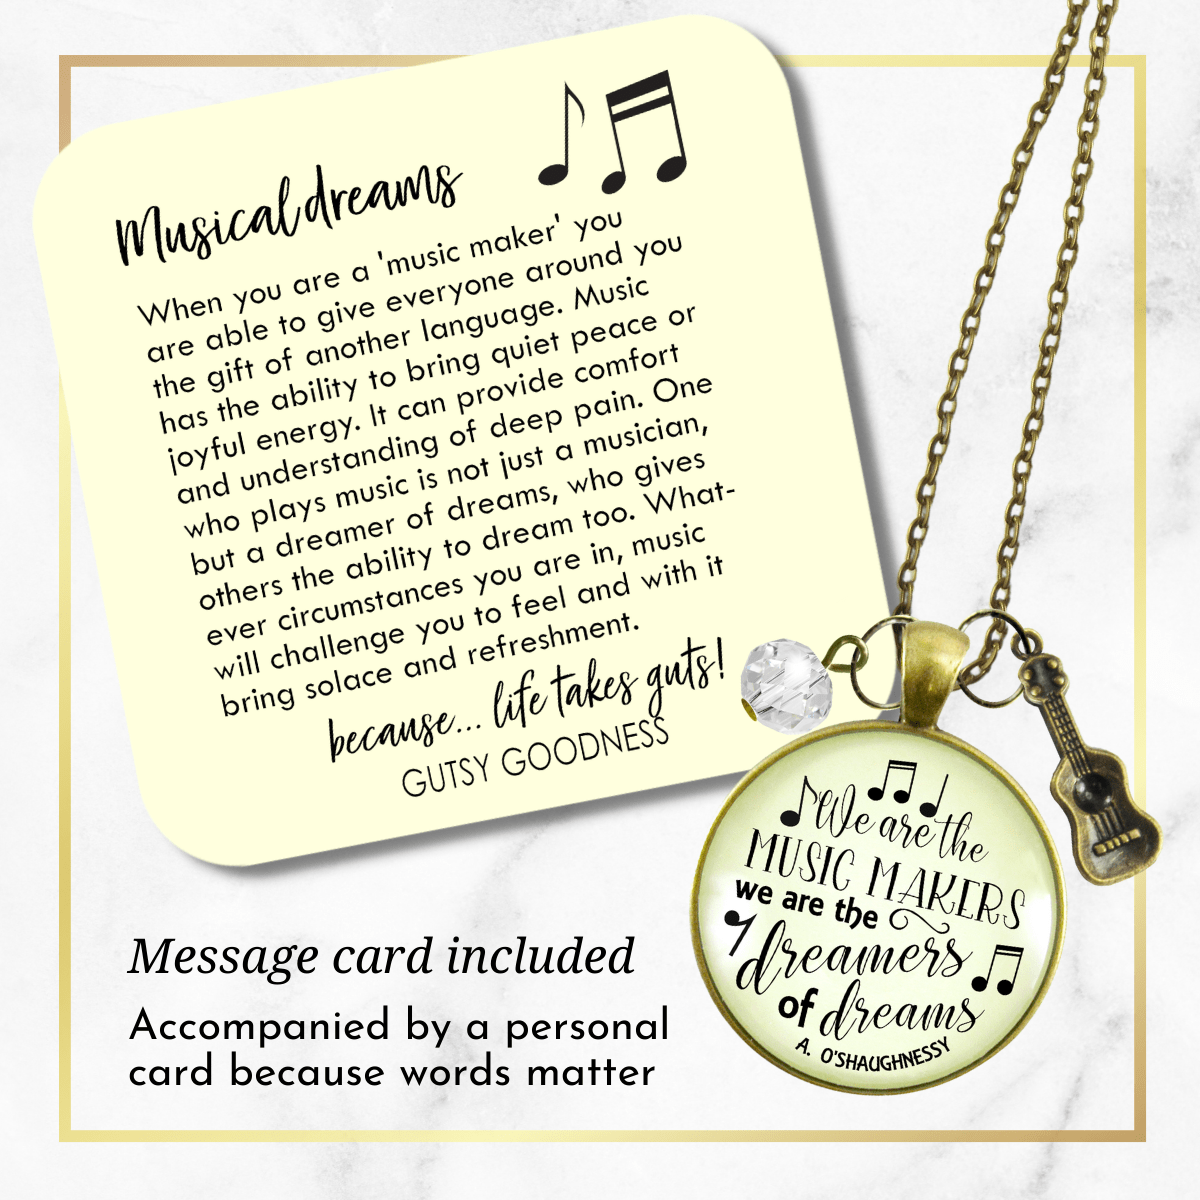 Gutsy Goodness Guitar Player Necklace We are Music Makers Musician Teacher Gift - Gutsy Goodness Handmade Jewelry;Guitar Player Necklace We Are Music Makers Musician Teacher Gift - Gutsy Goodness Handmade Jewelry Gifts